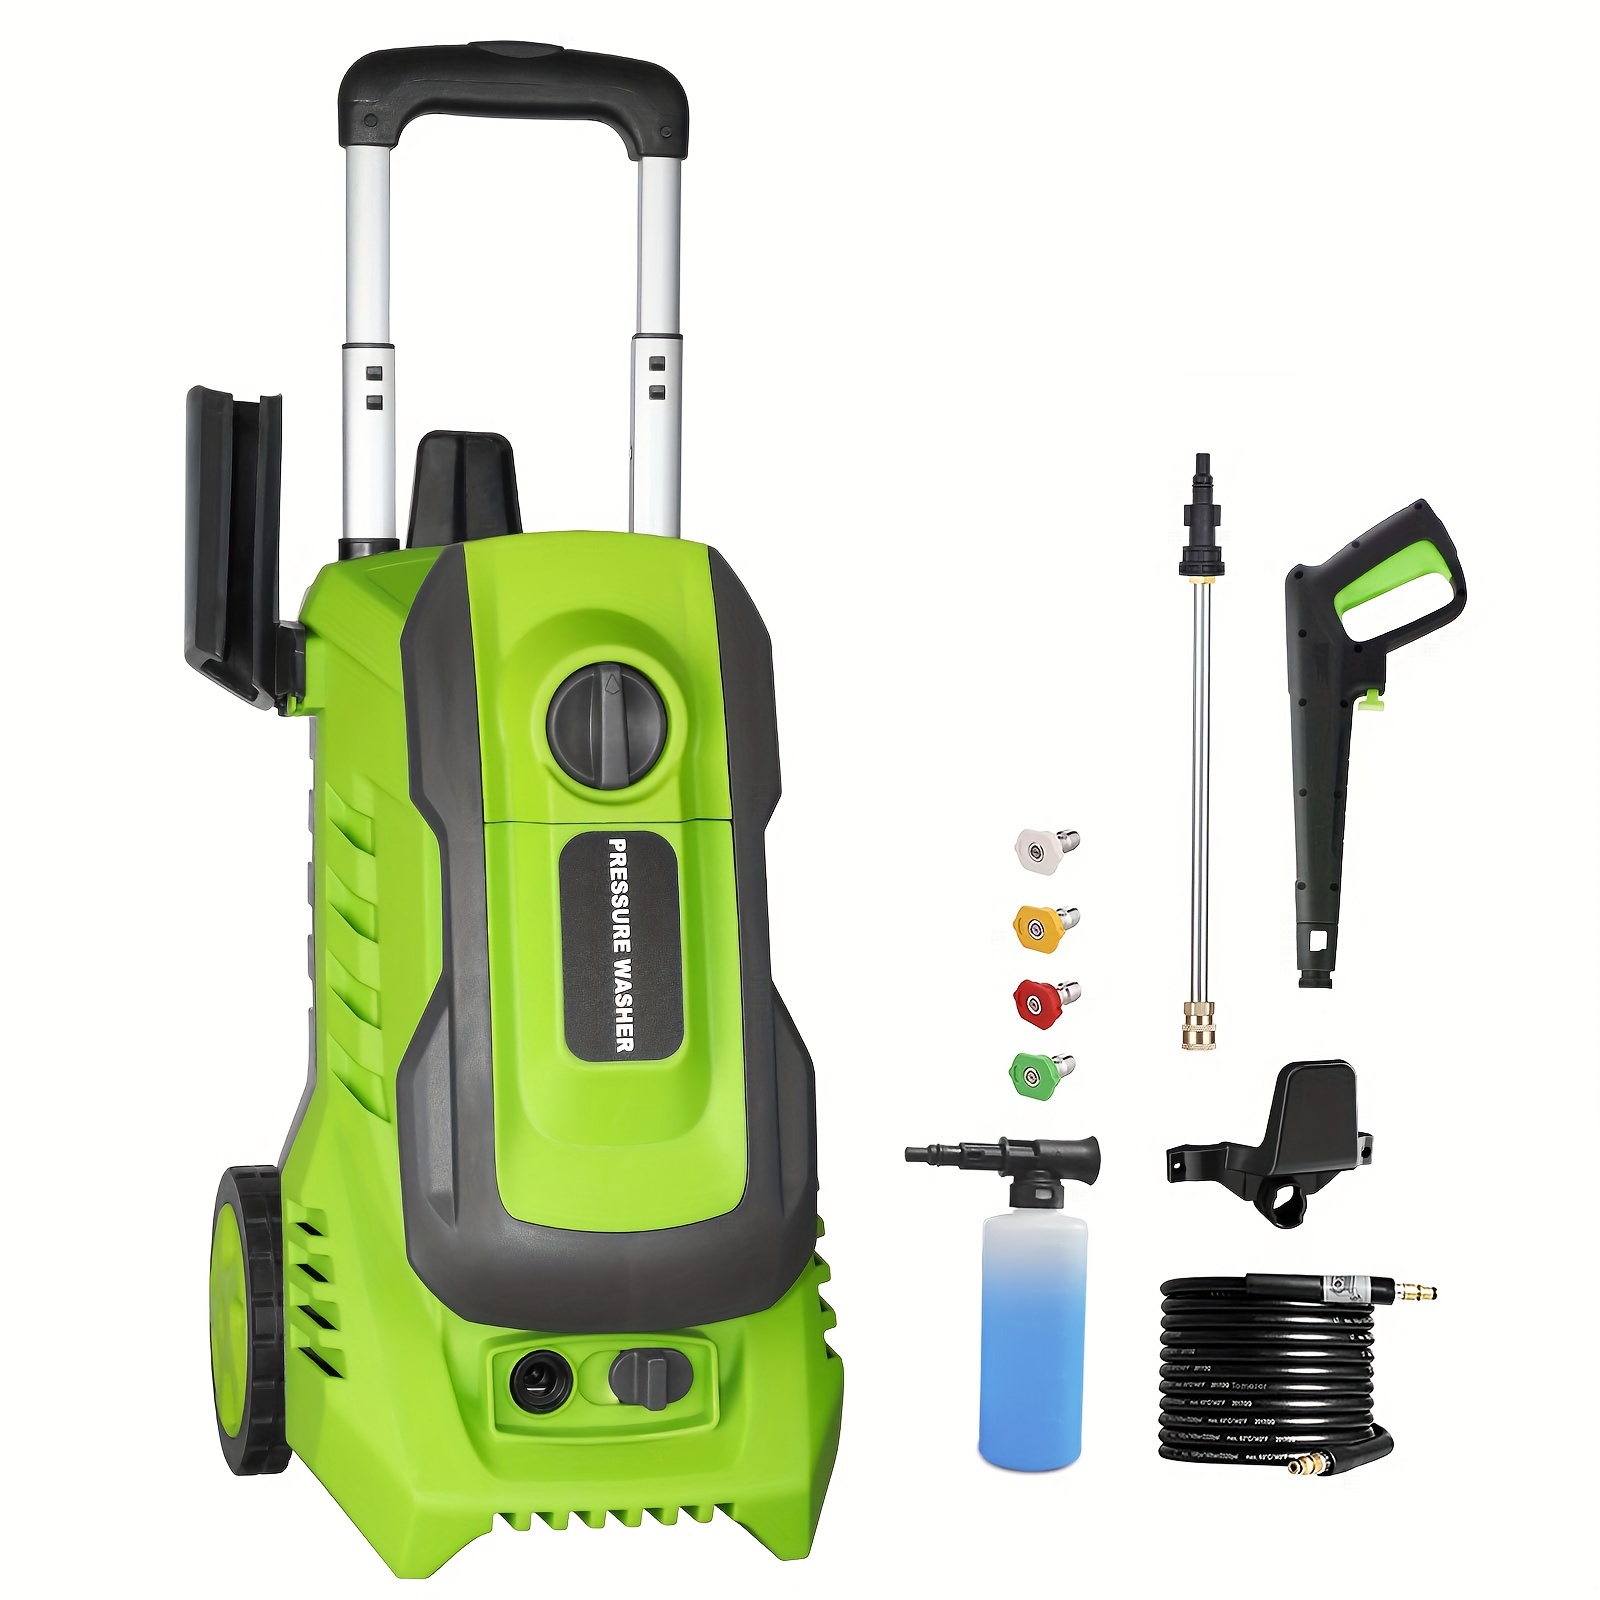 

Electric Power Washers - 4000 Psi Max High Pressure Washer 2.6 Gpm Power Washers Electric Powered With 4 Interchangeable Nozzles And Foam Cannon Hose Reel, Car Water Washer For Home/driveway/patio